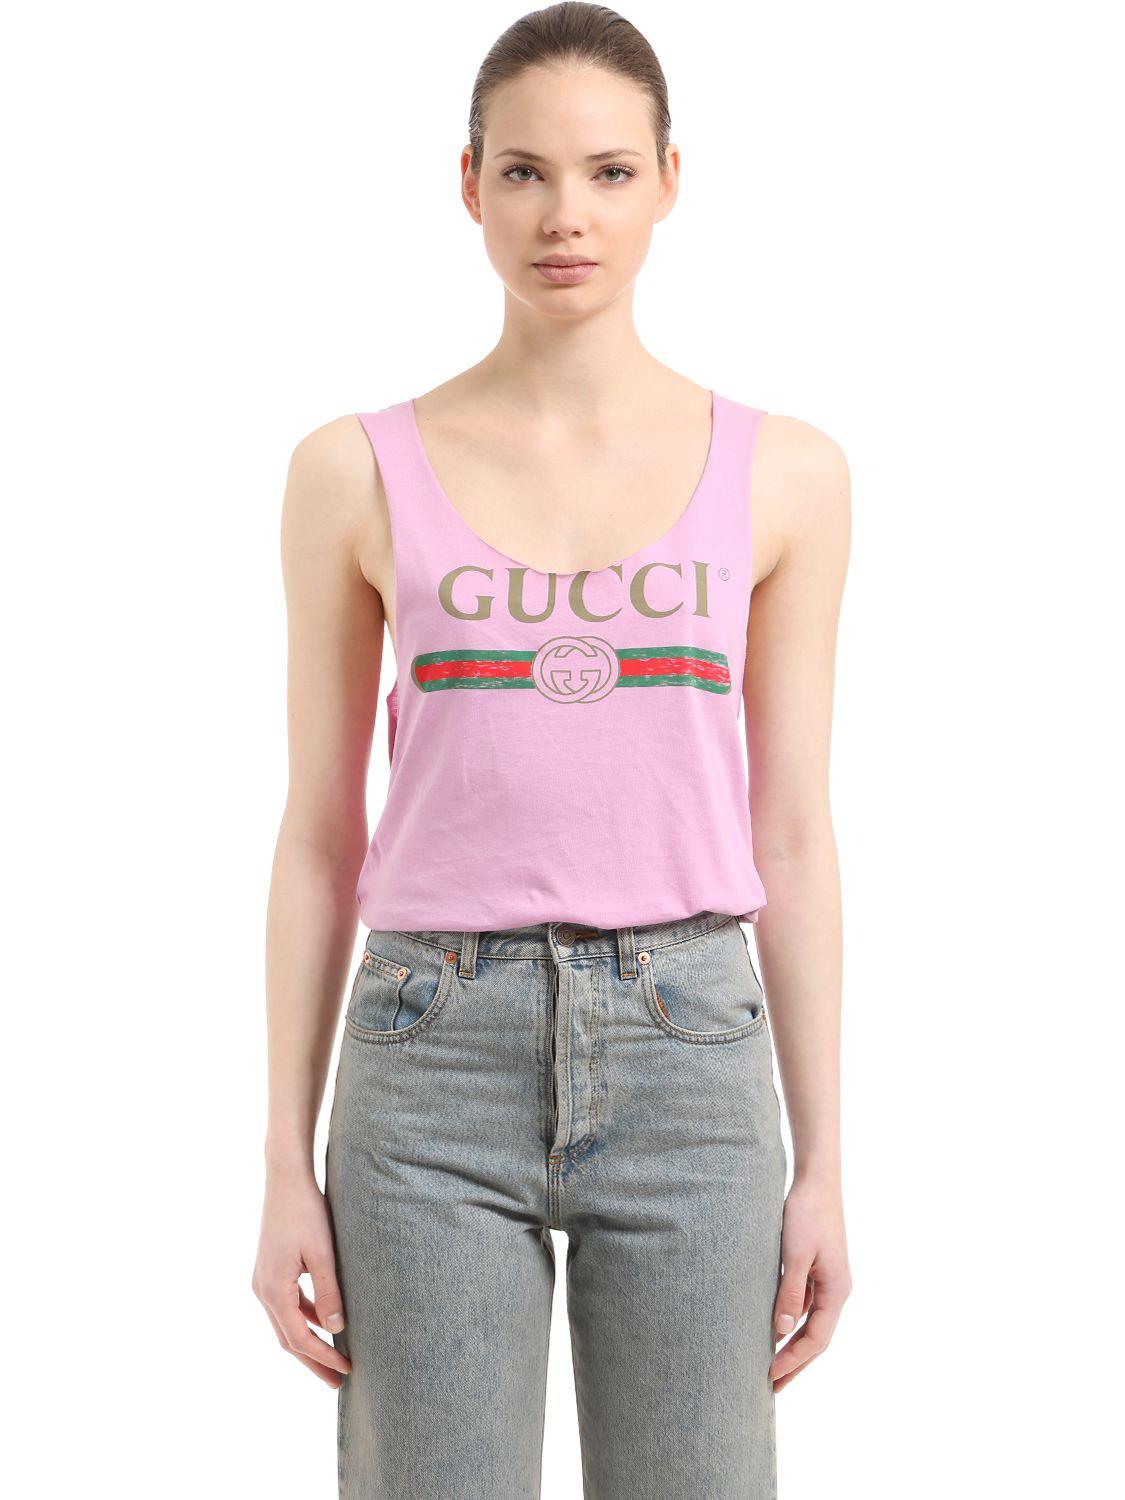 Gucci Logo Cotton Tank Top in Light Pink (Pink) | Lyst